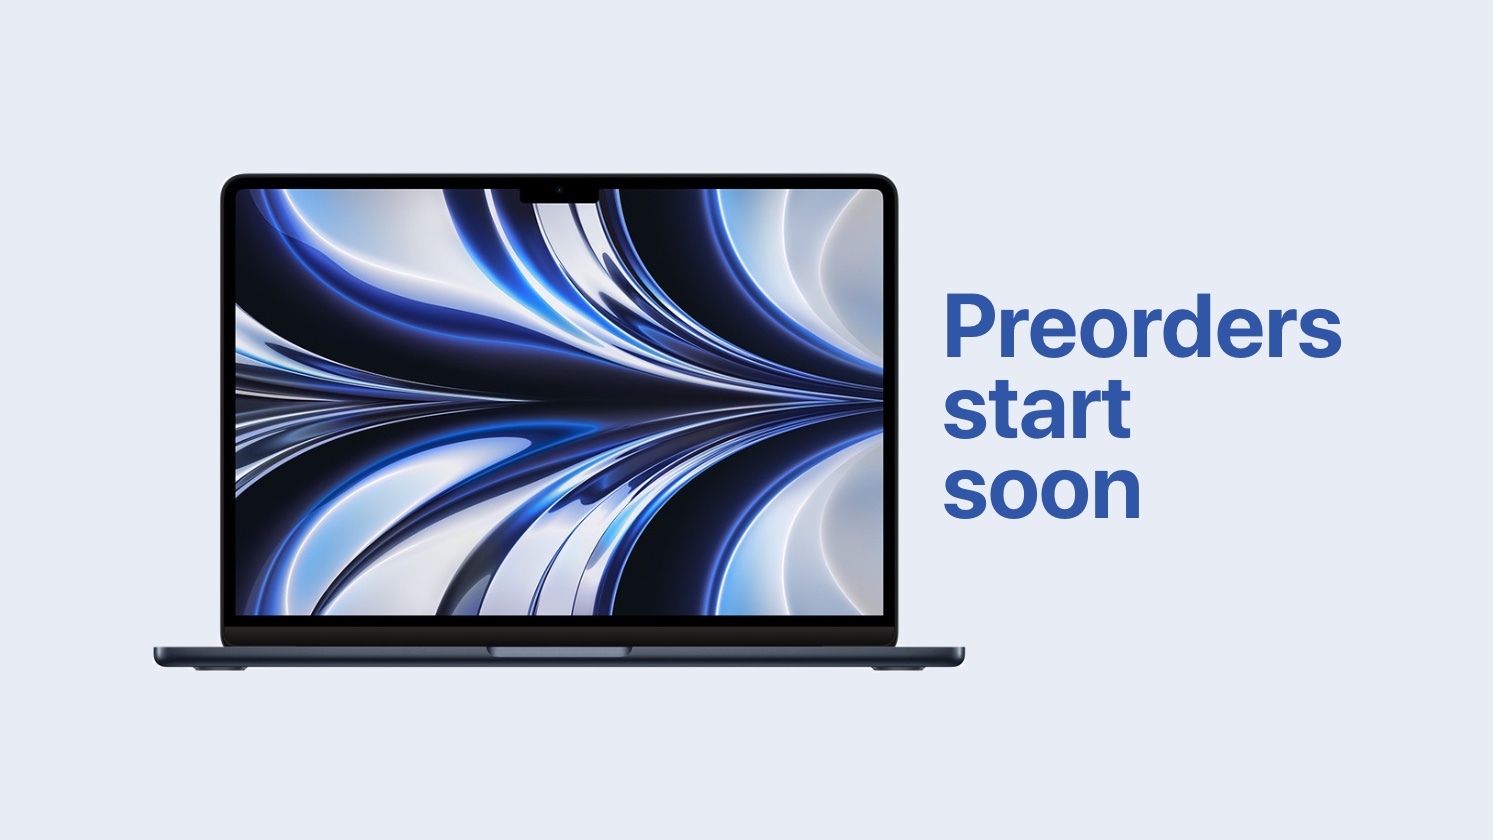 How to get ready to preorder the M2 MacBook Air